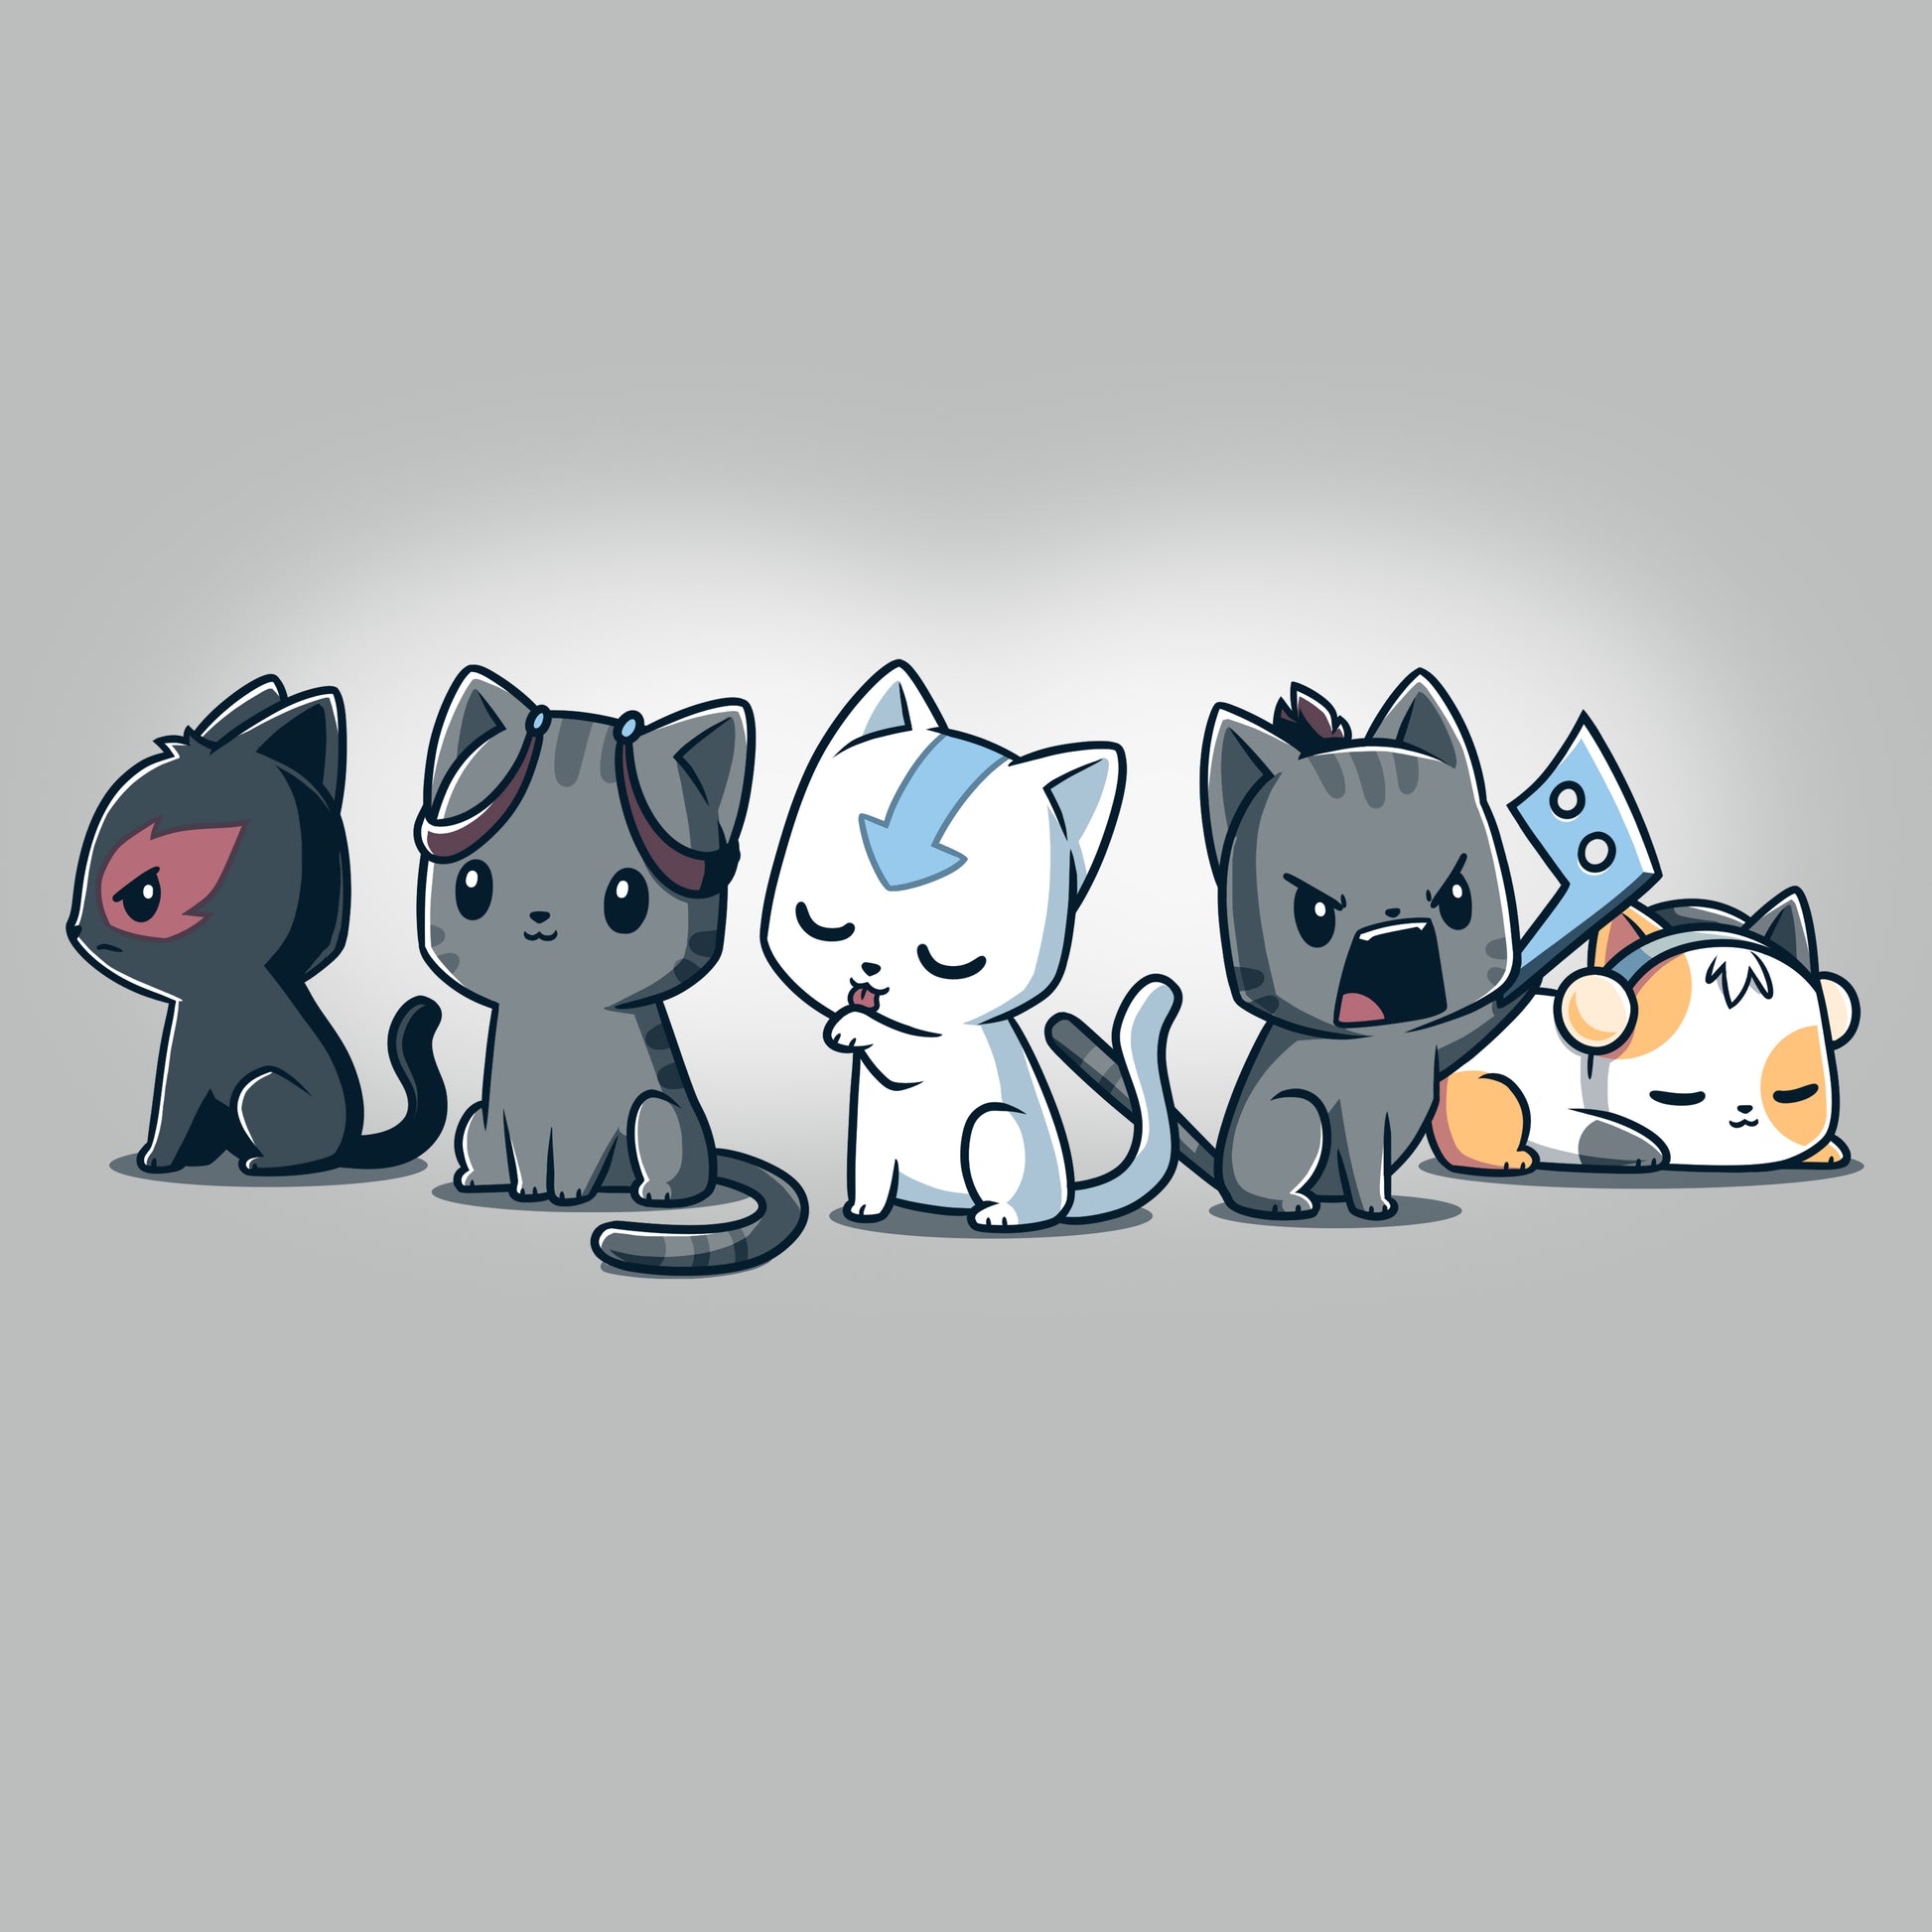 A group of TeeTurtle's Elemental Kitties standing next to each other on a T-shirt.